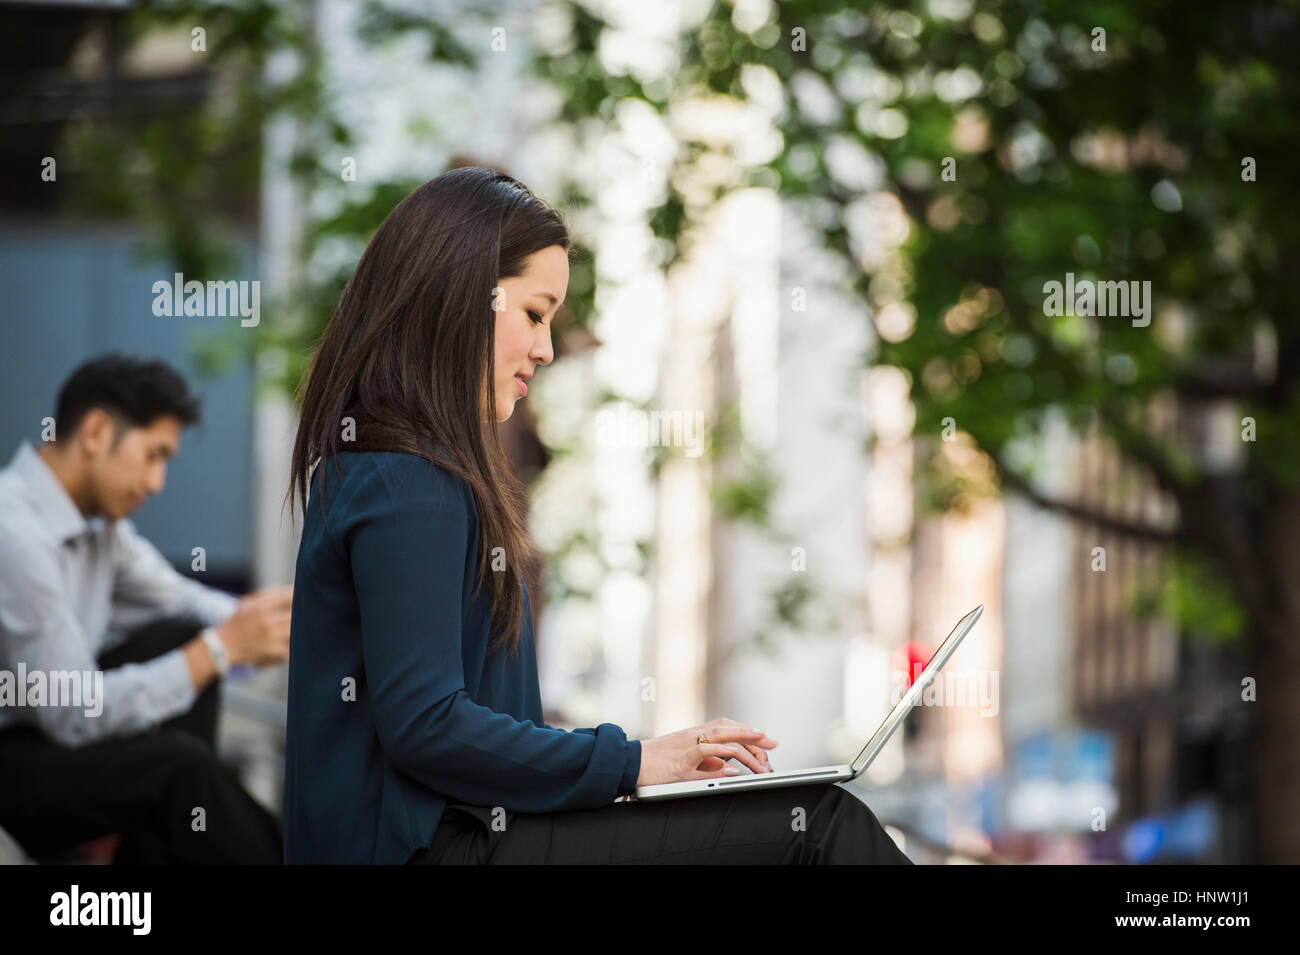 Chinese businesswoman typing on laptop in city Banque D'Images